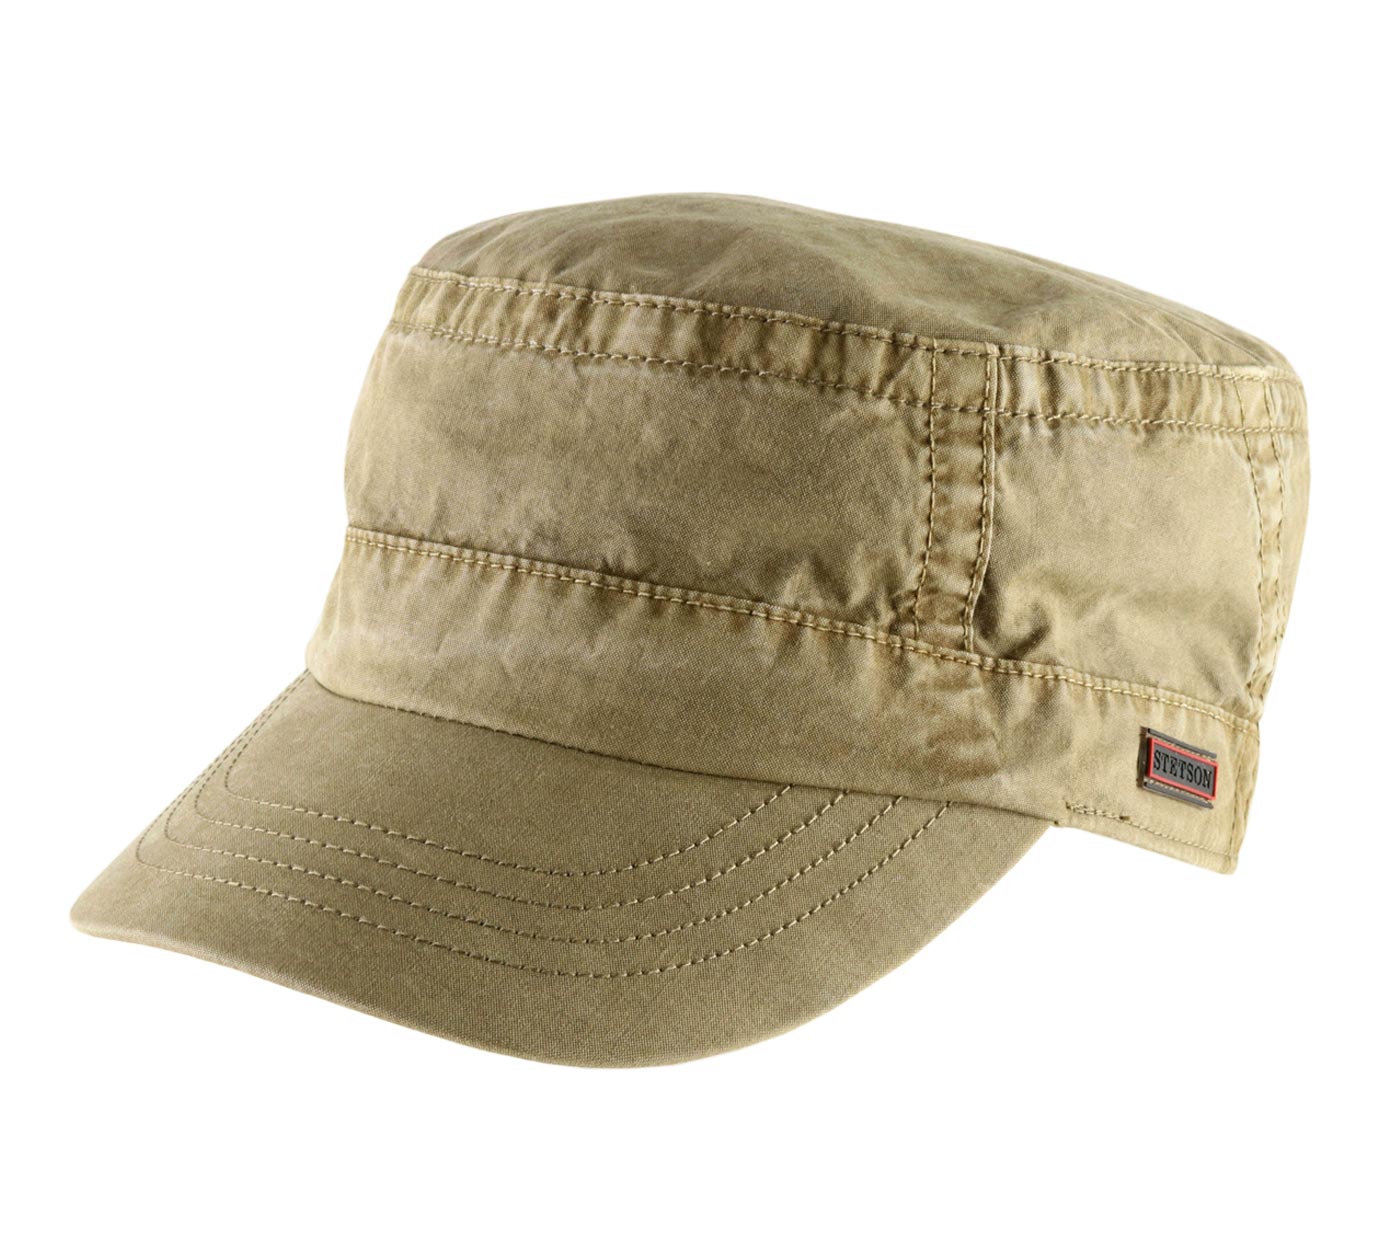 BW PMC Military US contractor utilisation Army ISAF Outdoor Cap Casquette OD Green olive 